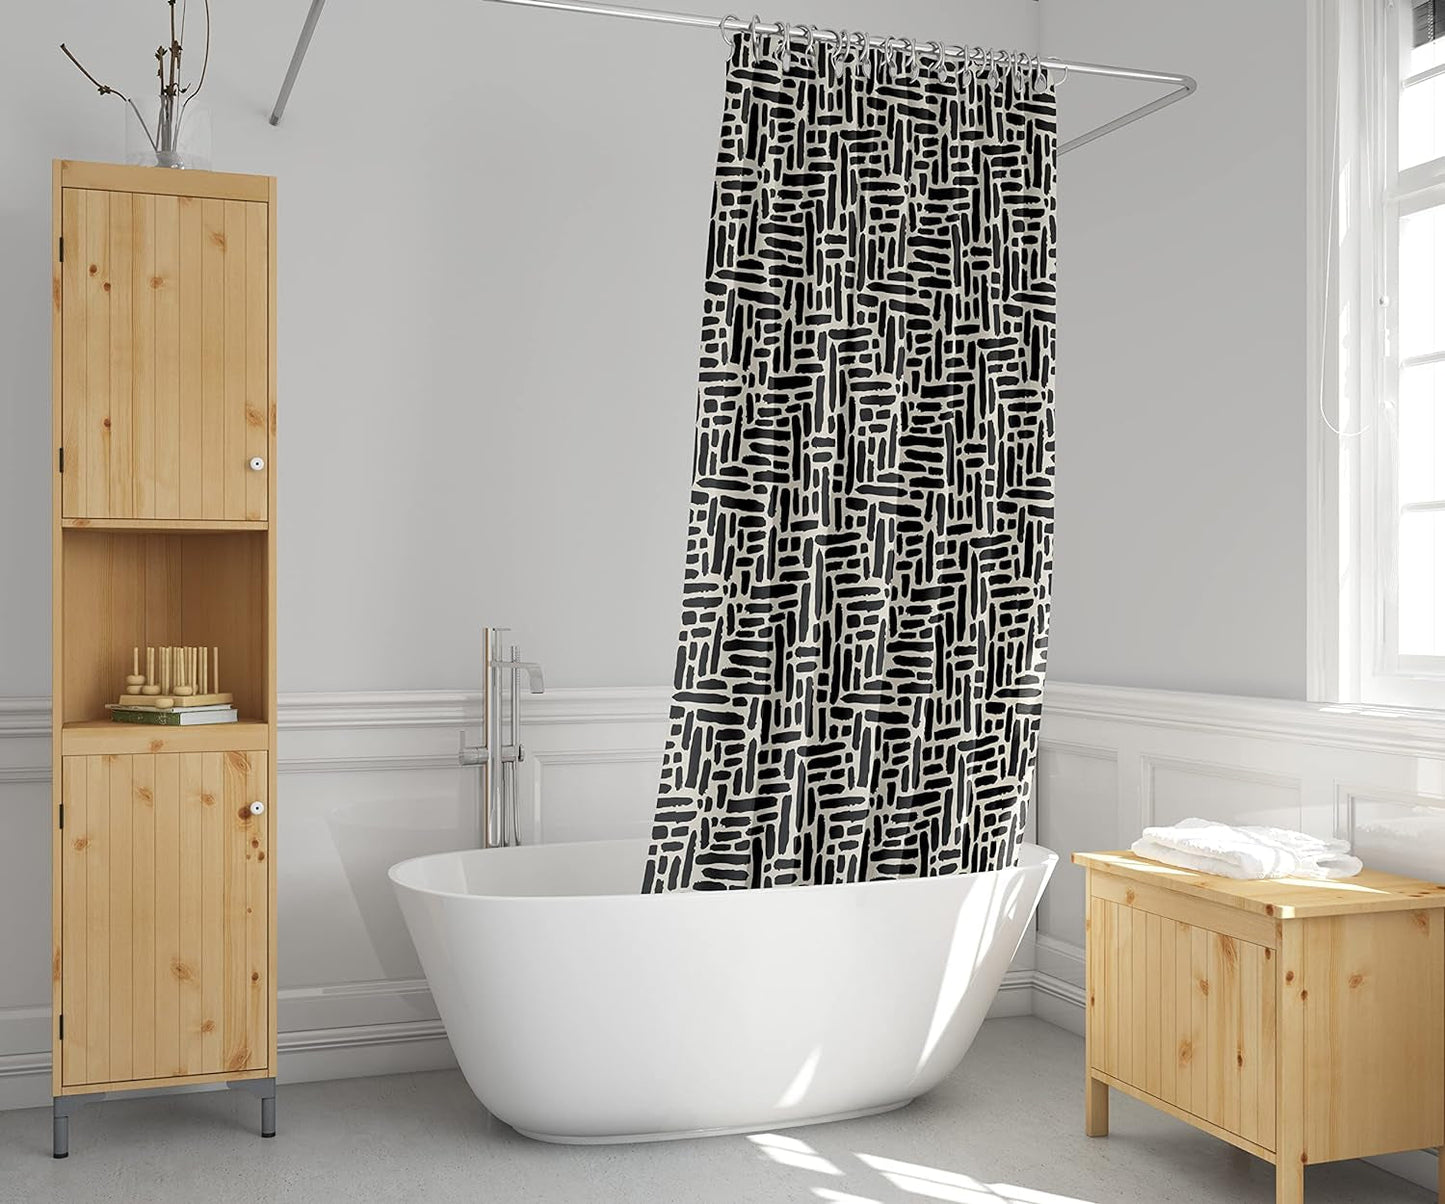 Modern Black and Ivory Brushstroke Print Shower Curtain - Abstract Minimalist Pattern - Neutral Design - Trendy Fabric Shower Curtain for Any Bathroom - 72X72 Inches (Brushstroke)